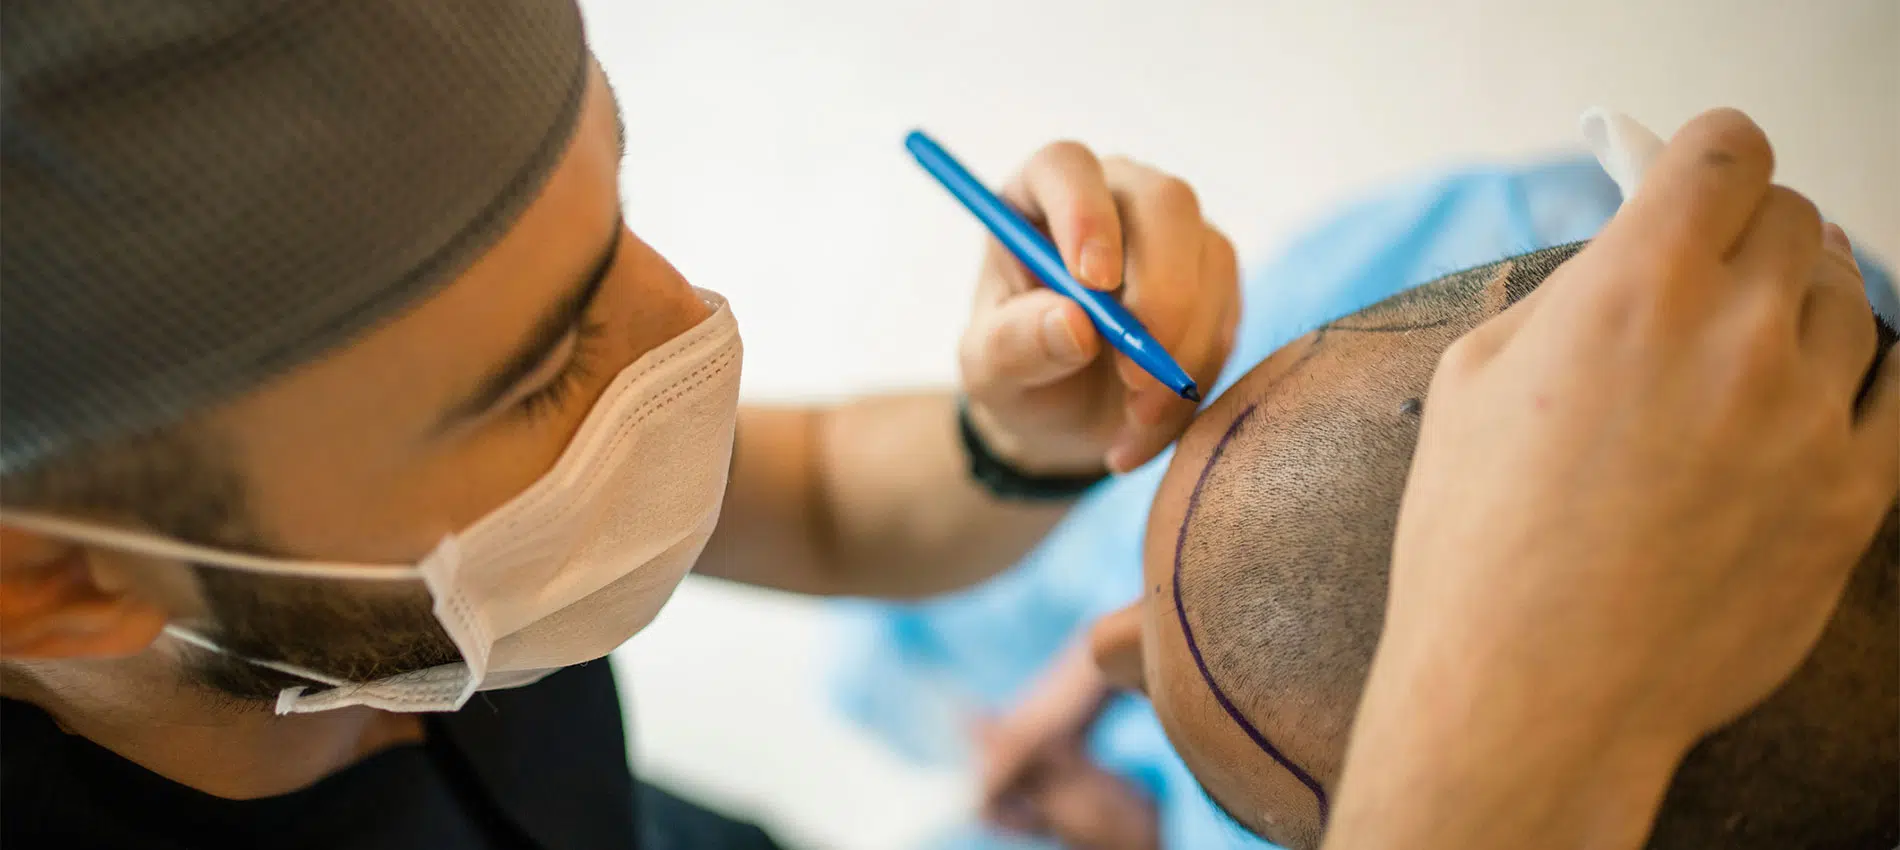 India Emerges as the Hair Transplant Capital of the World